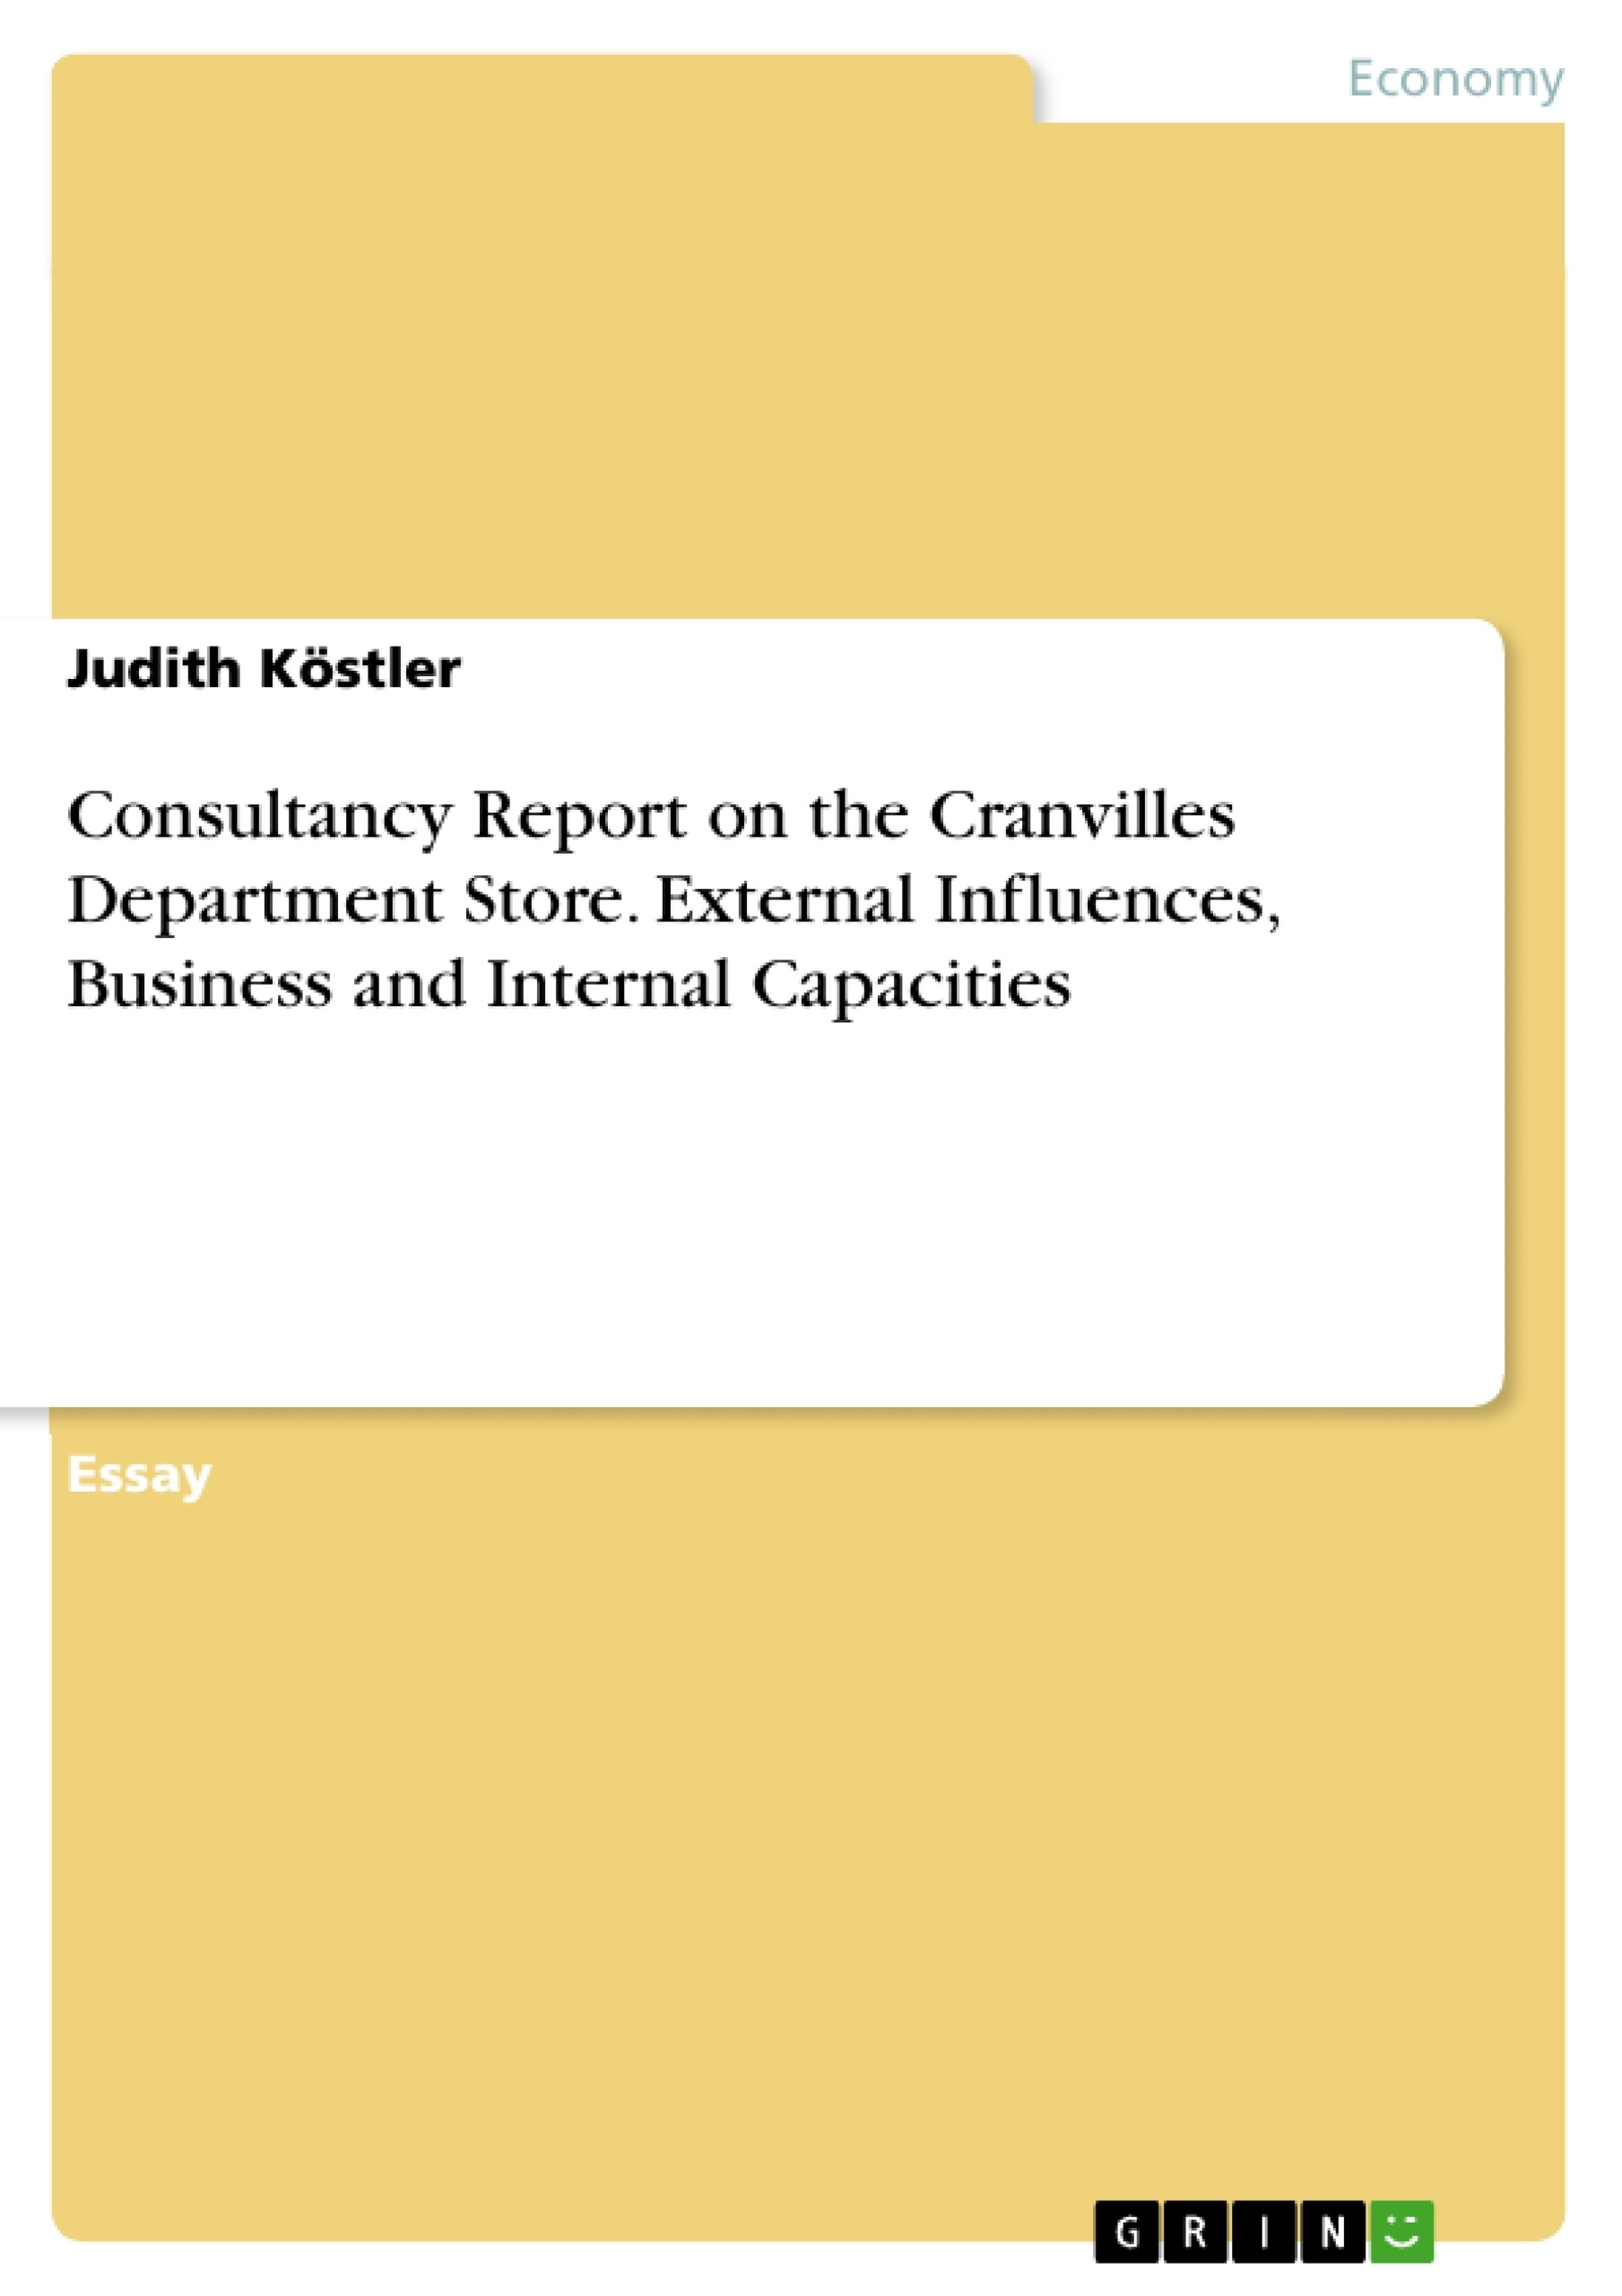 Título: Consultancy Report on the Cranvilles Department Store. External Influences, Business and Internal Capacities